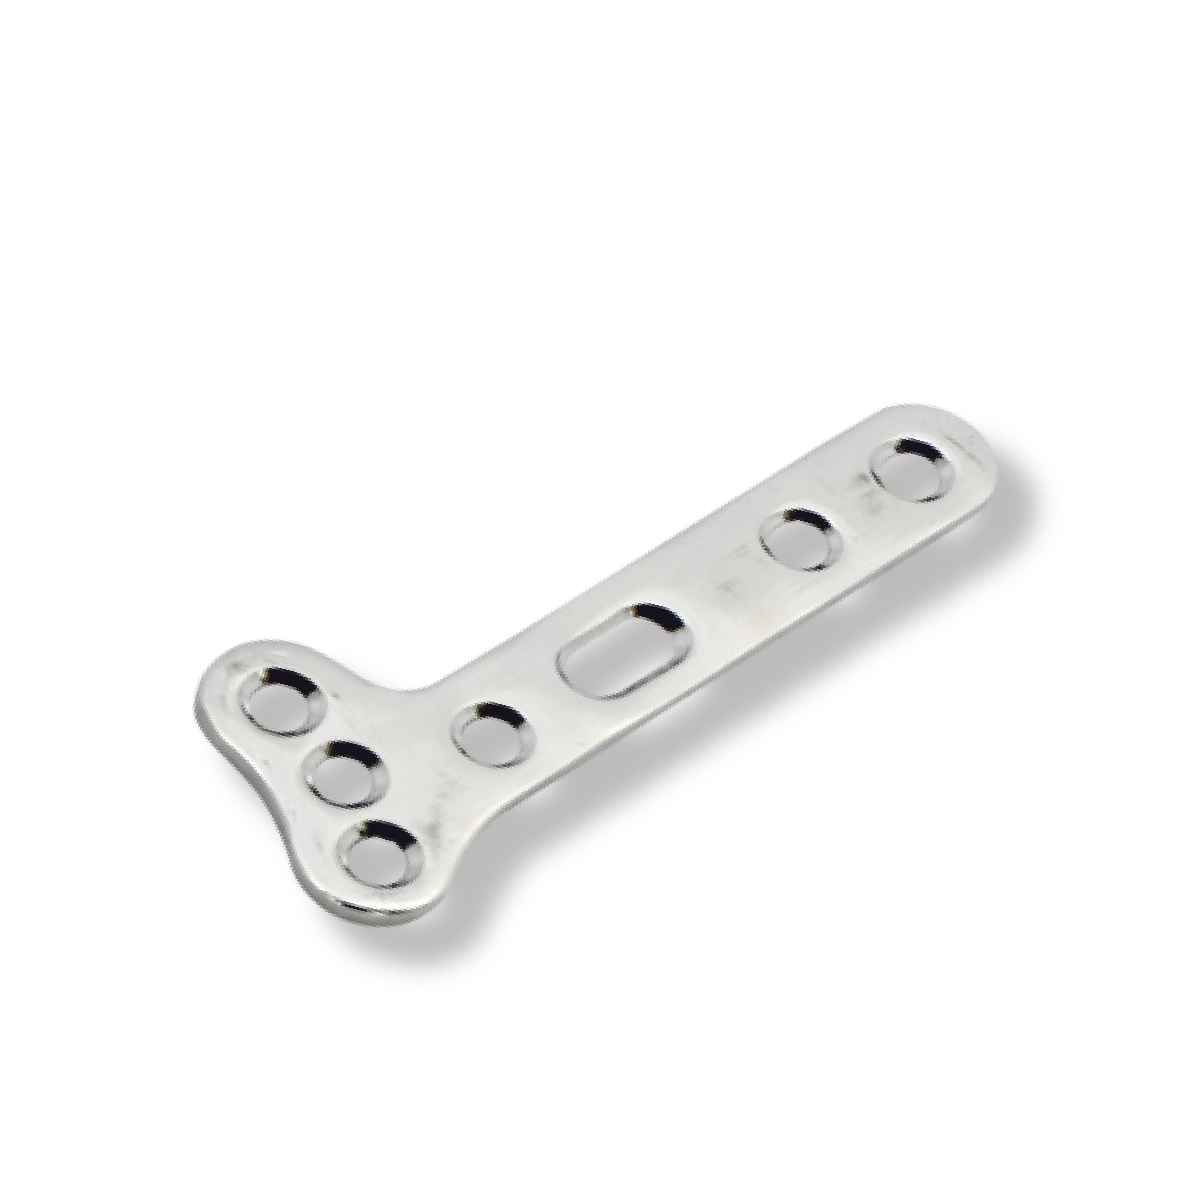 Plate for 3.5mm Screw